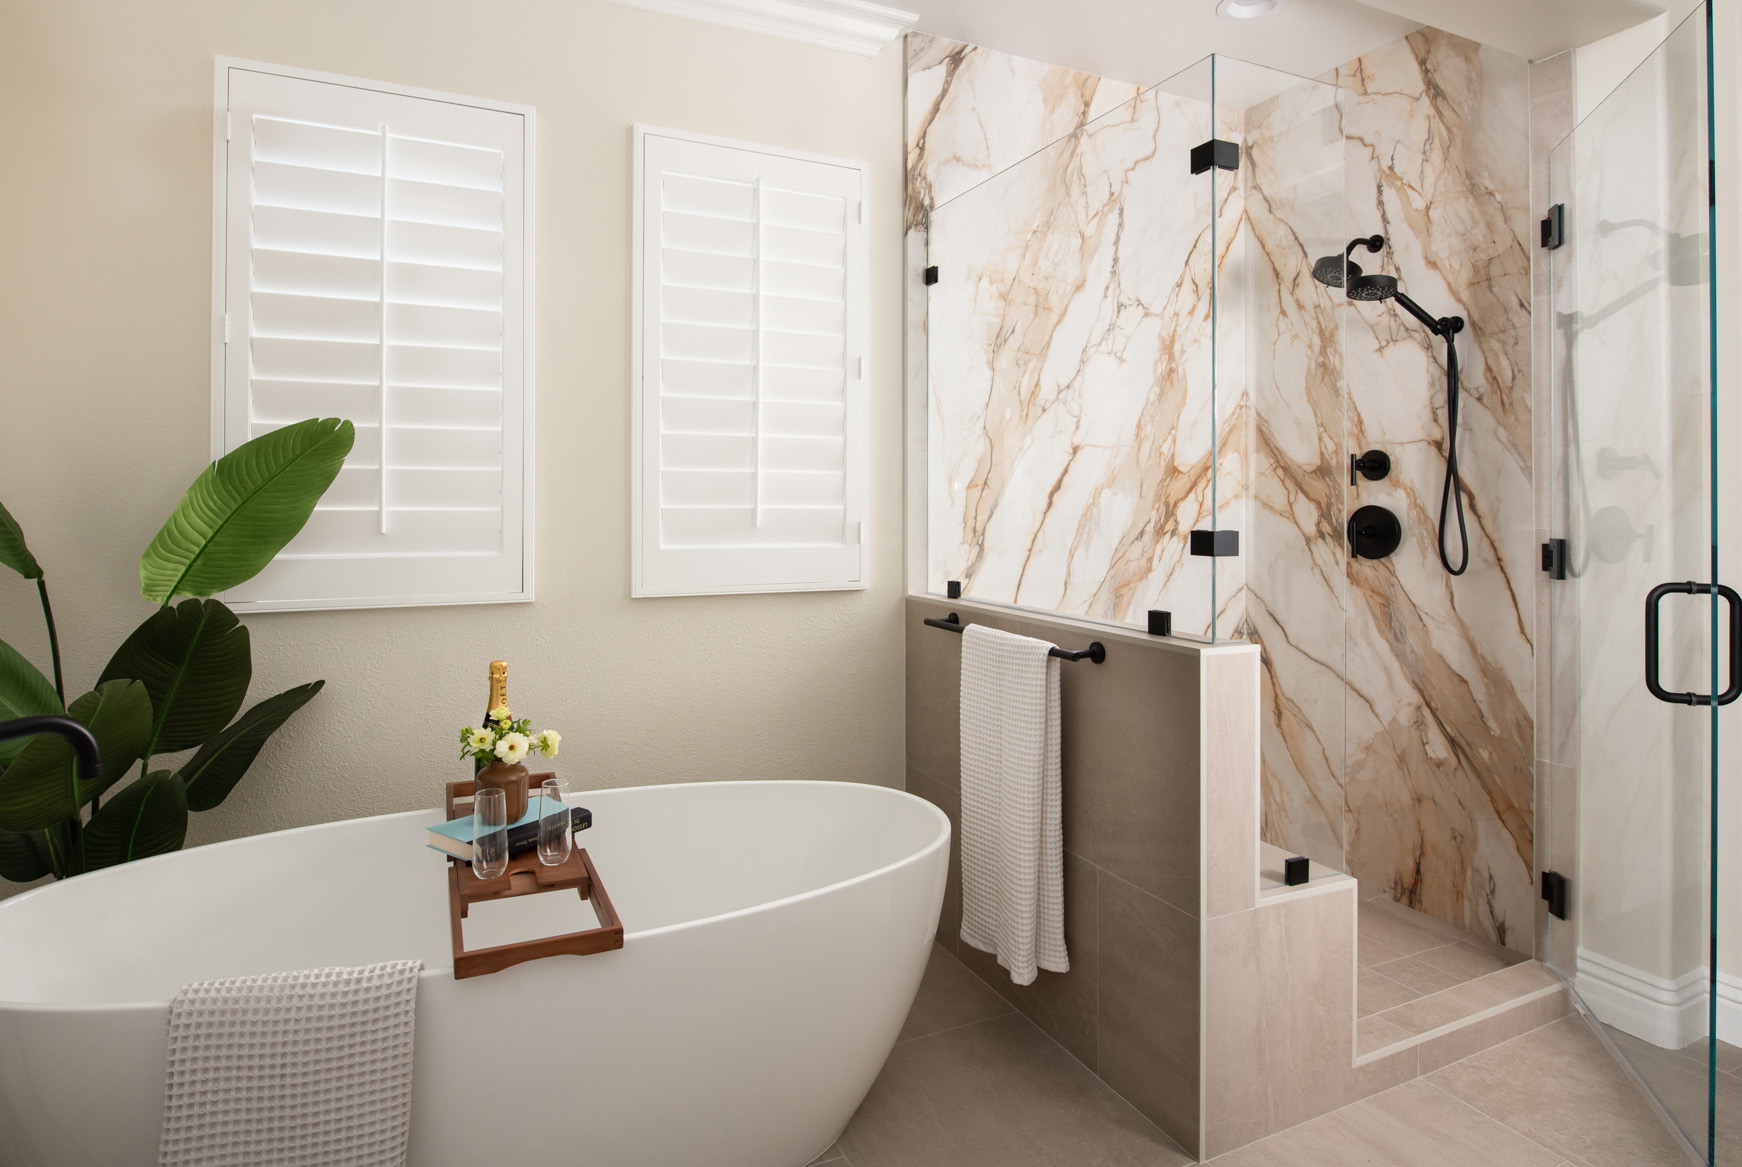 marble slabs in the shower make a stunning statement